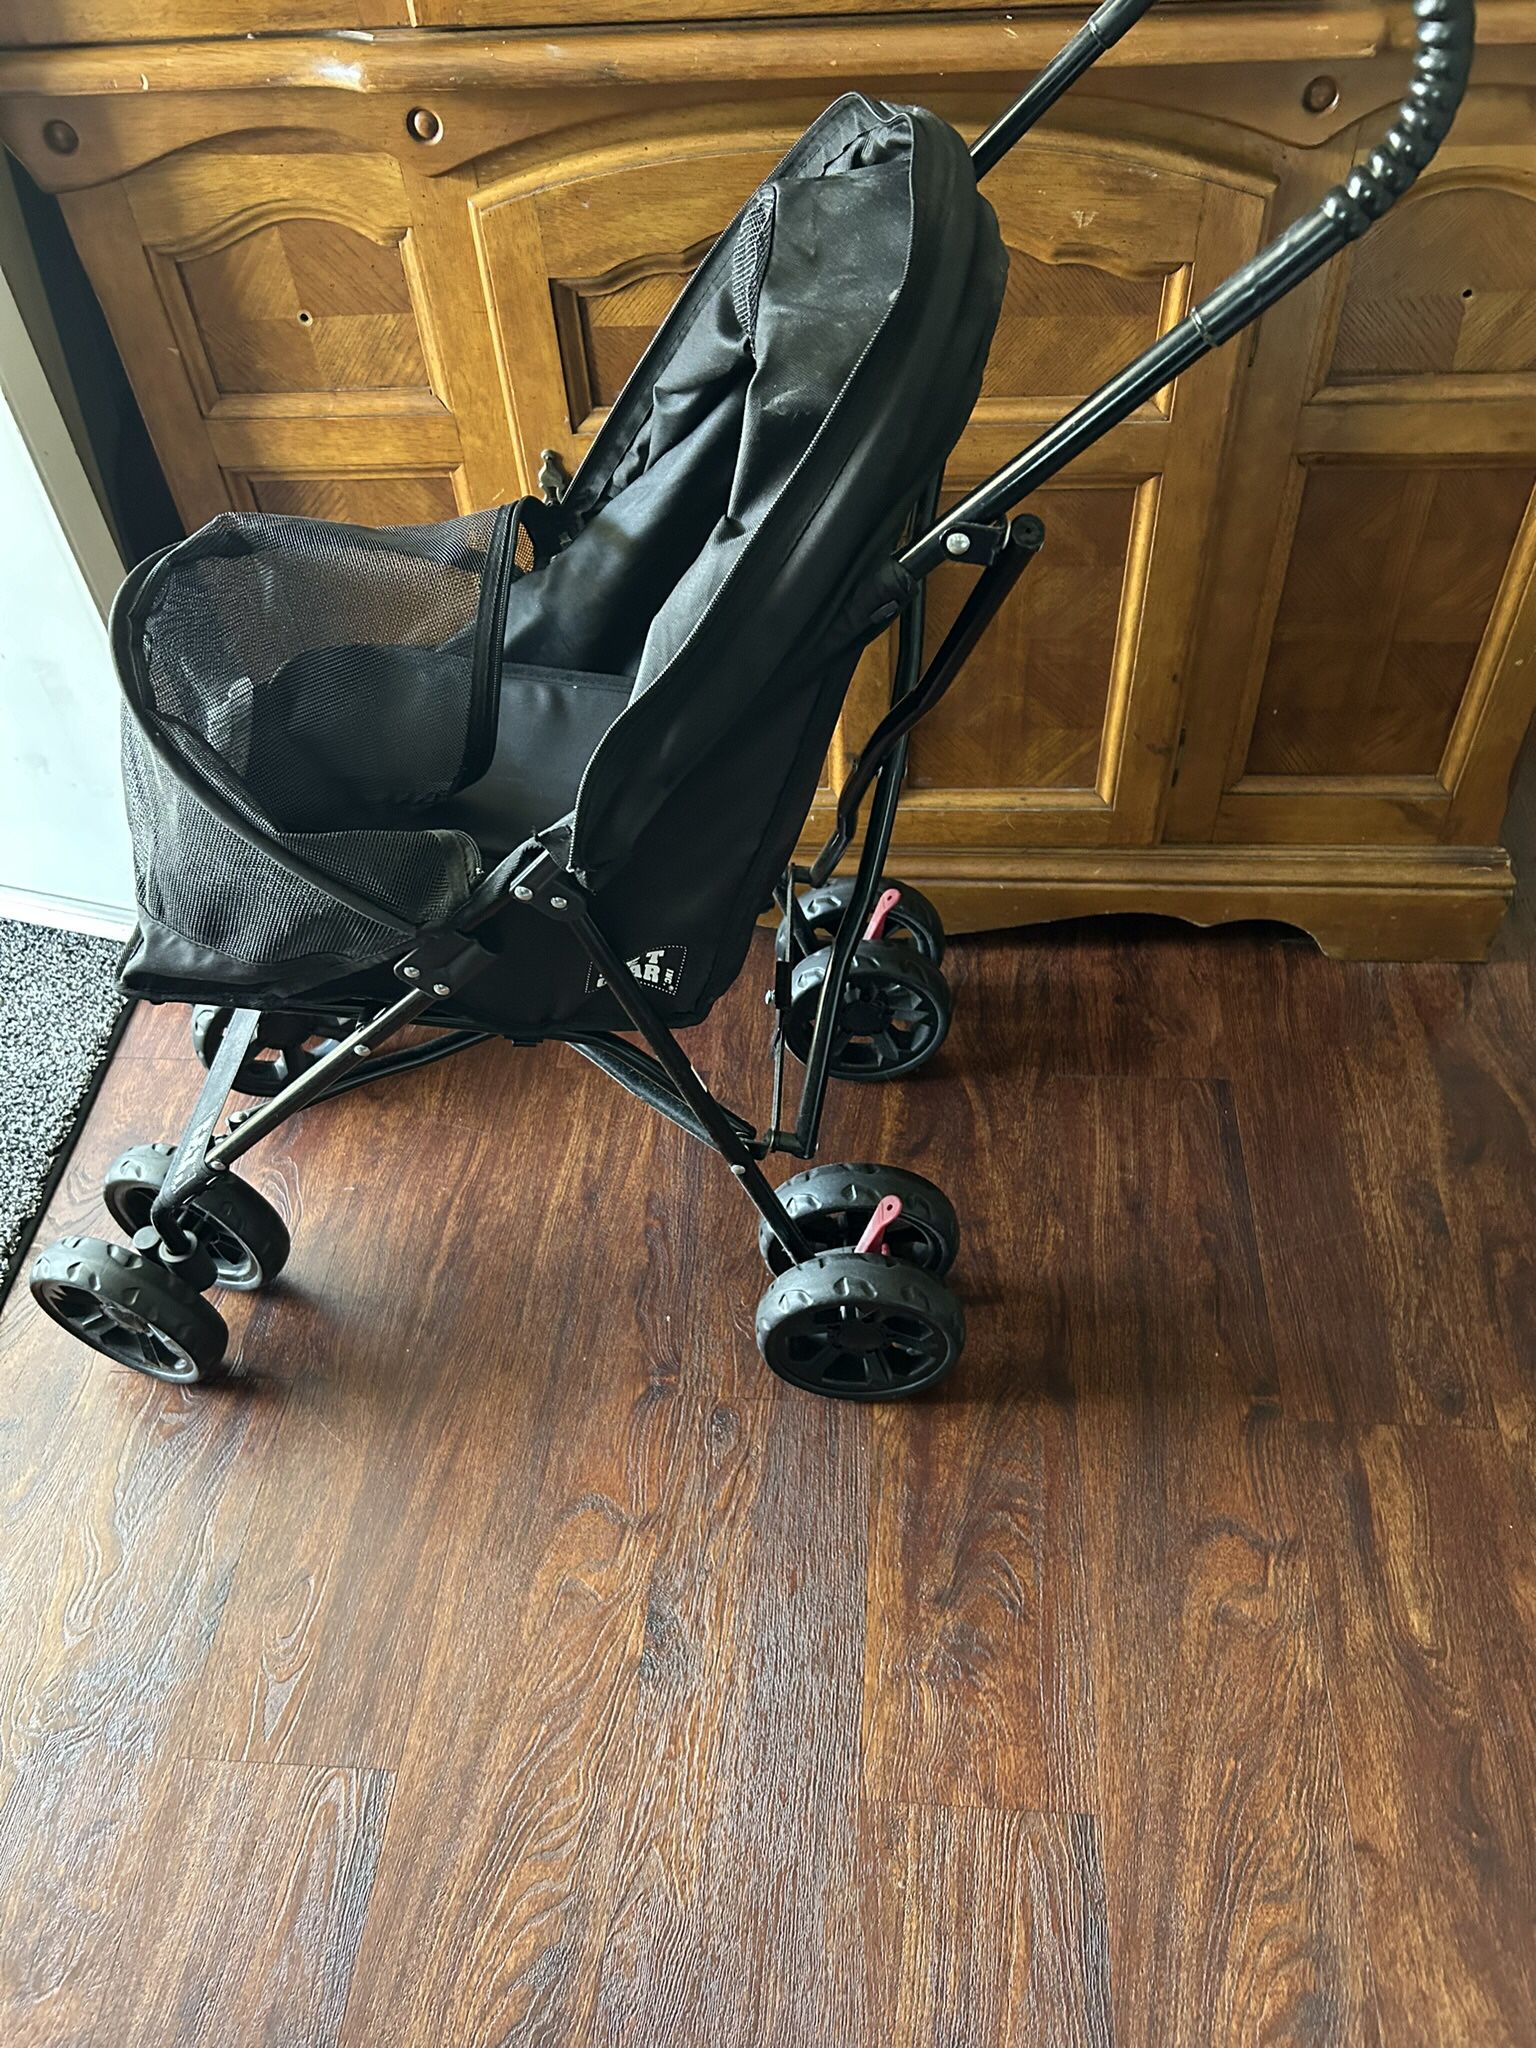 Dog Stroller For Small Dog Or Cat 15 Pounds Or Less